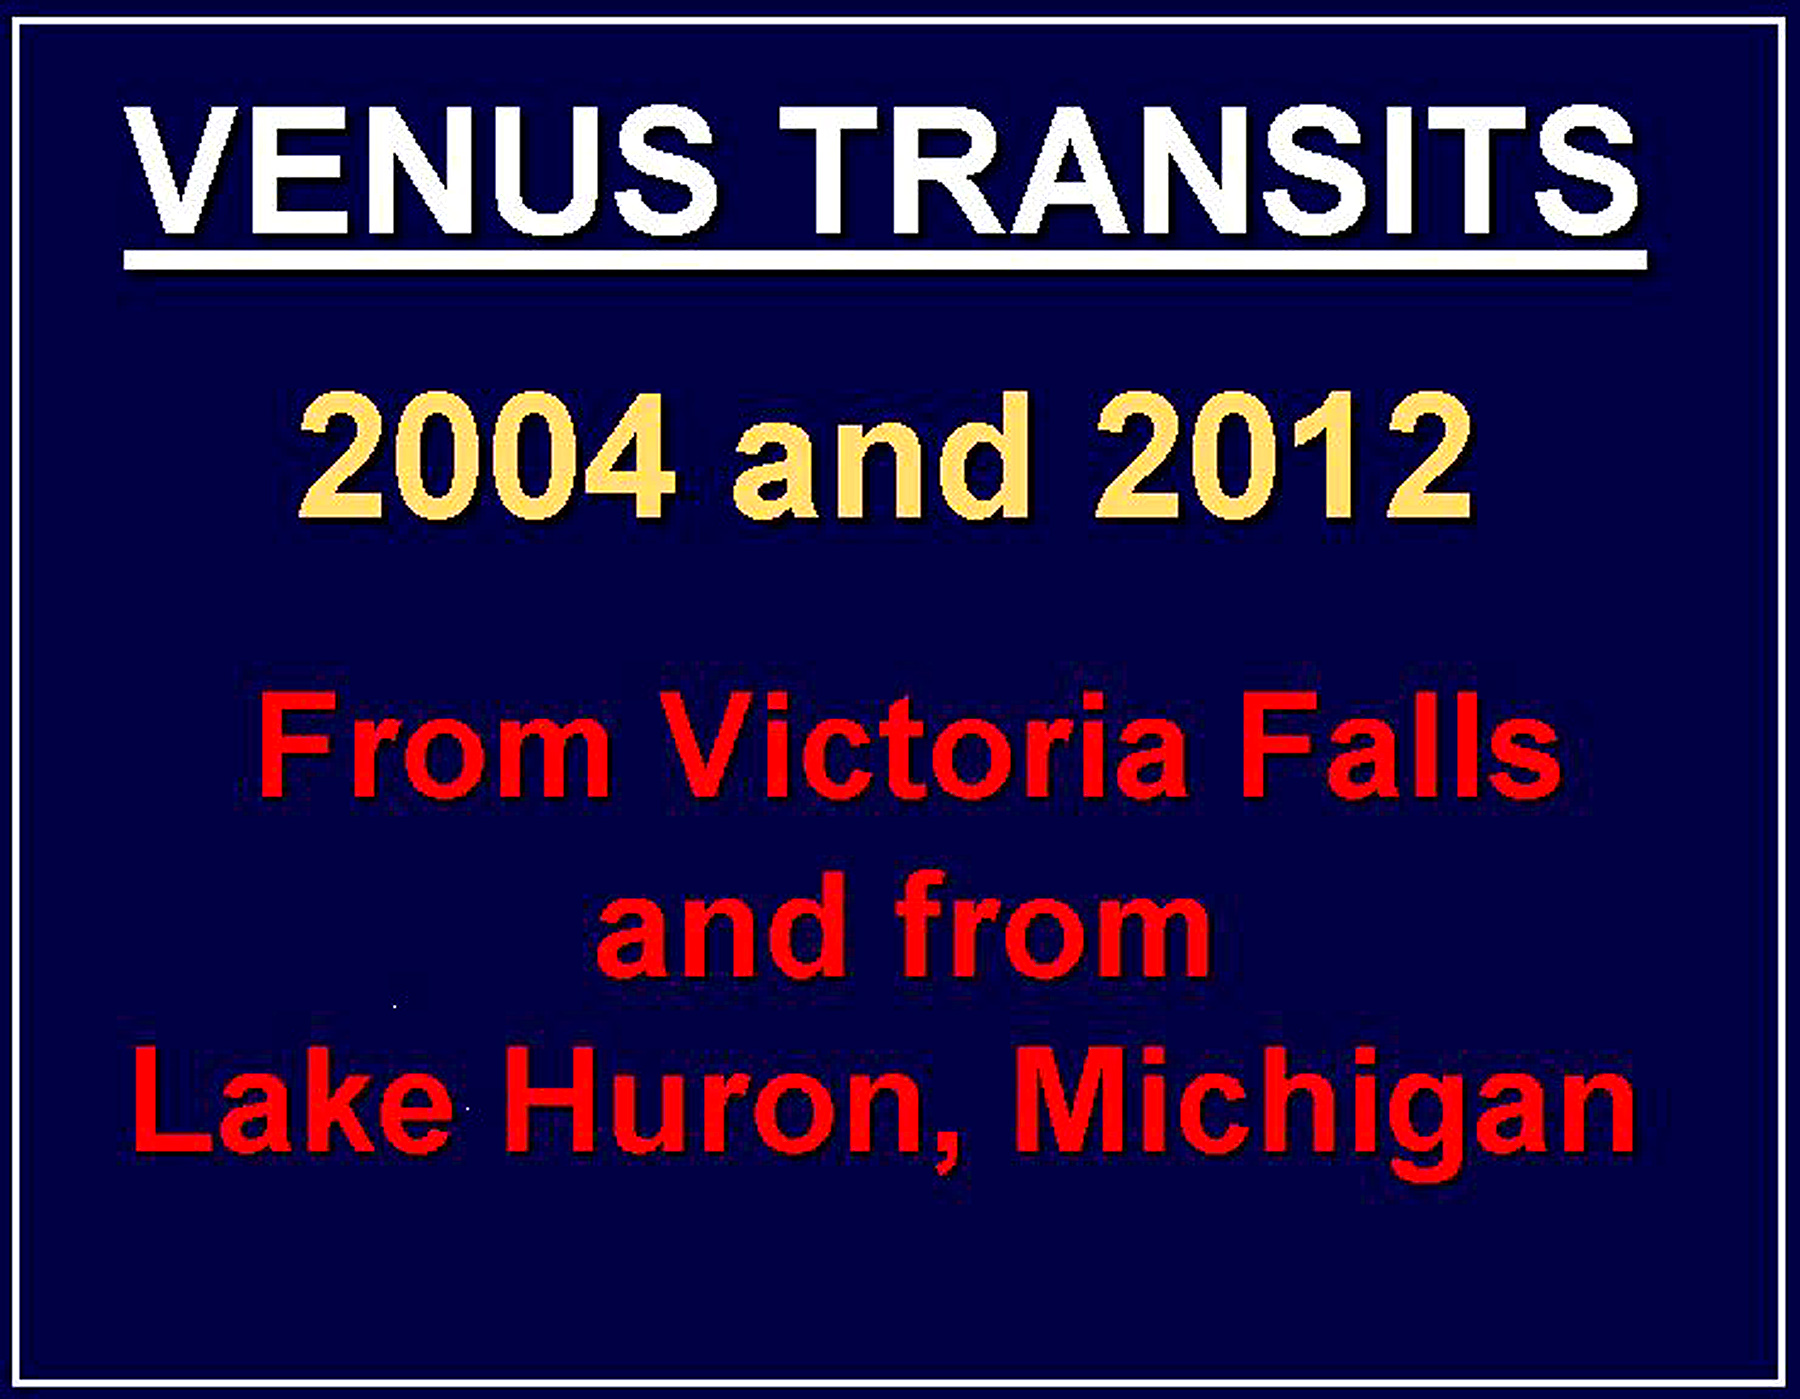 VT - 2004 - A00 - Title for 2004 and 2012 Transits